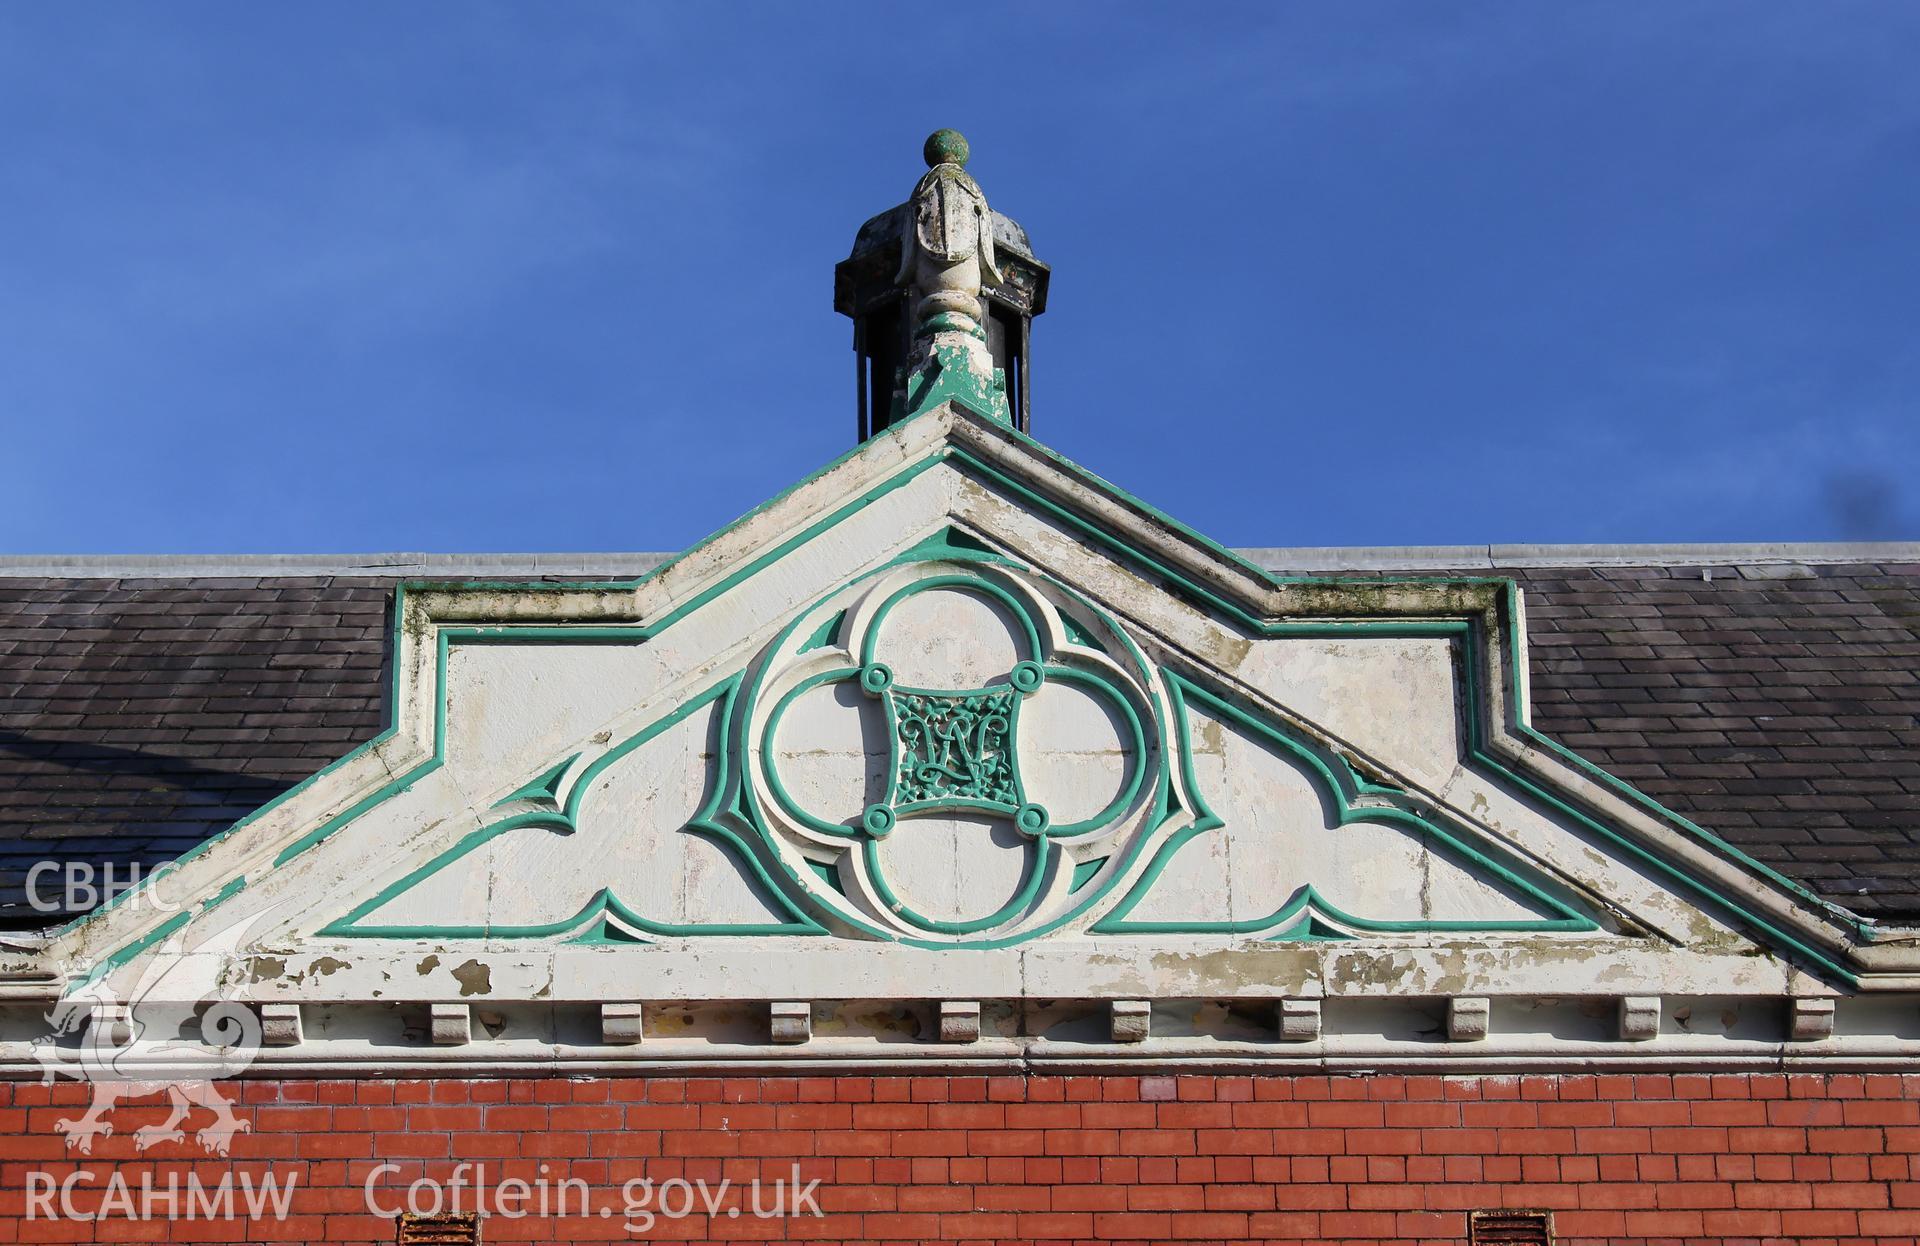 Detailed view of decoration on front elevation of the Railway Institute, Bangor. Photographed during survey conducted by Sue Fielding for the RCAHMW on 4th April 2016.